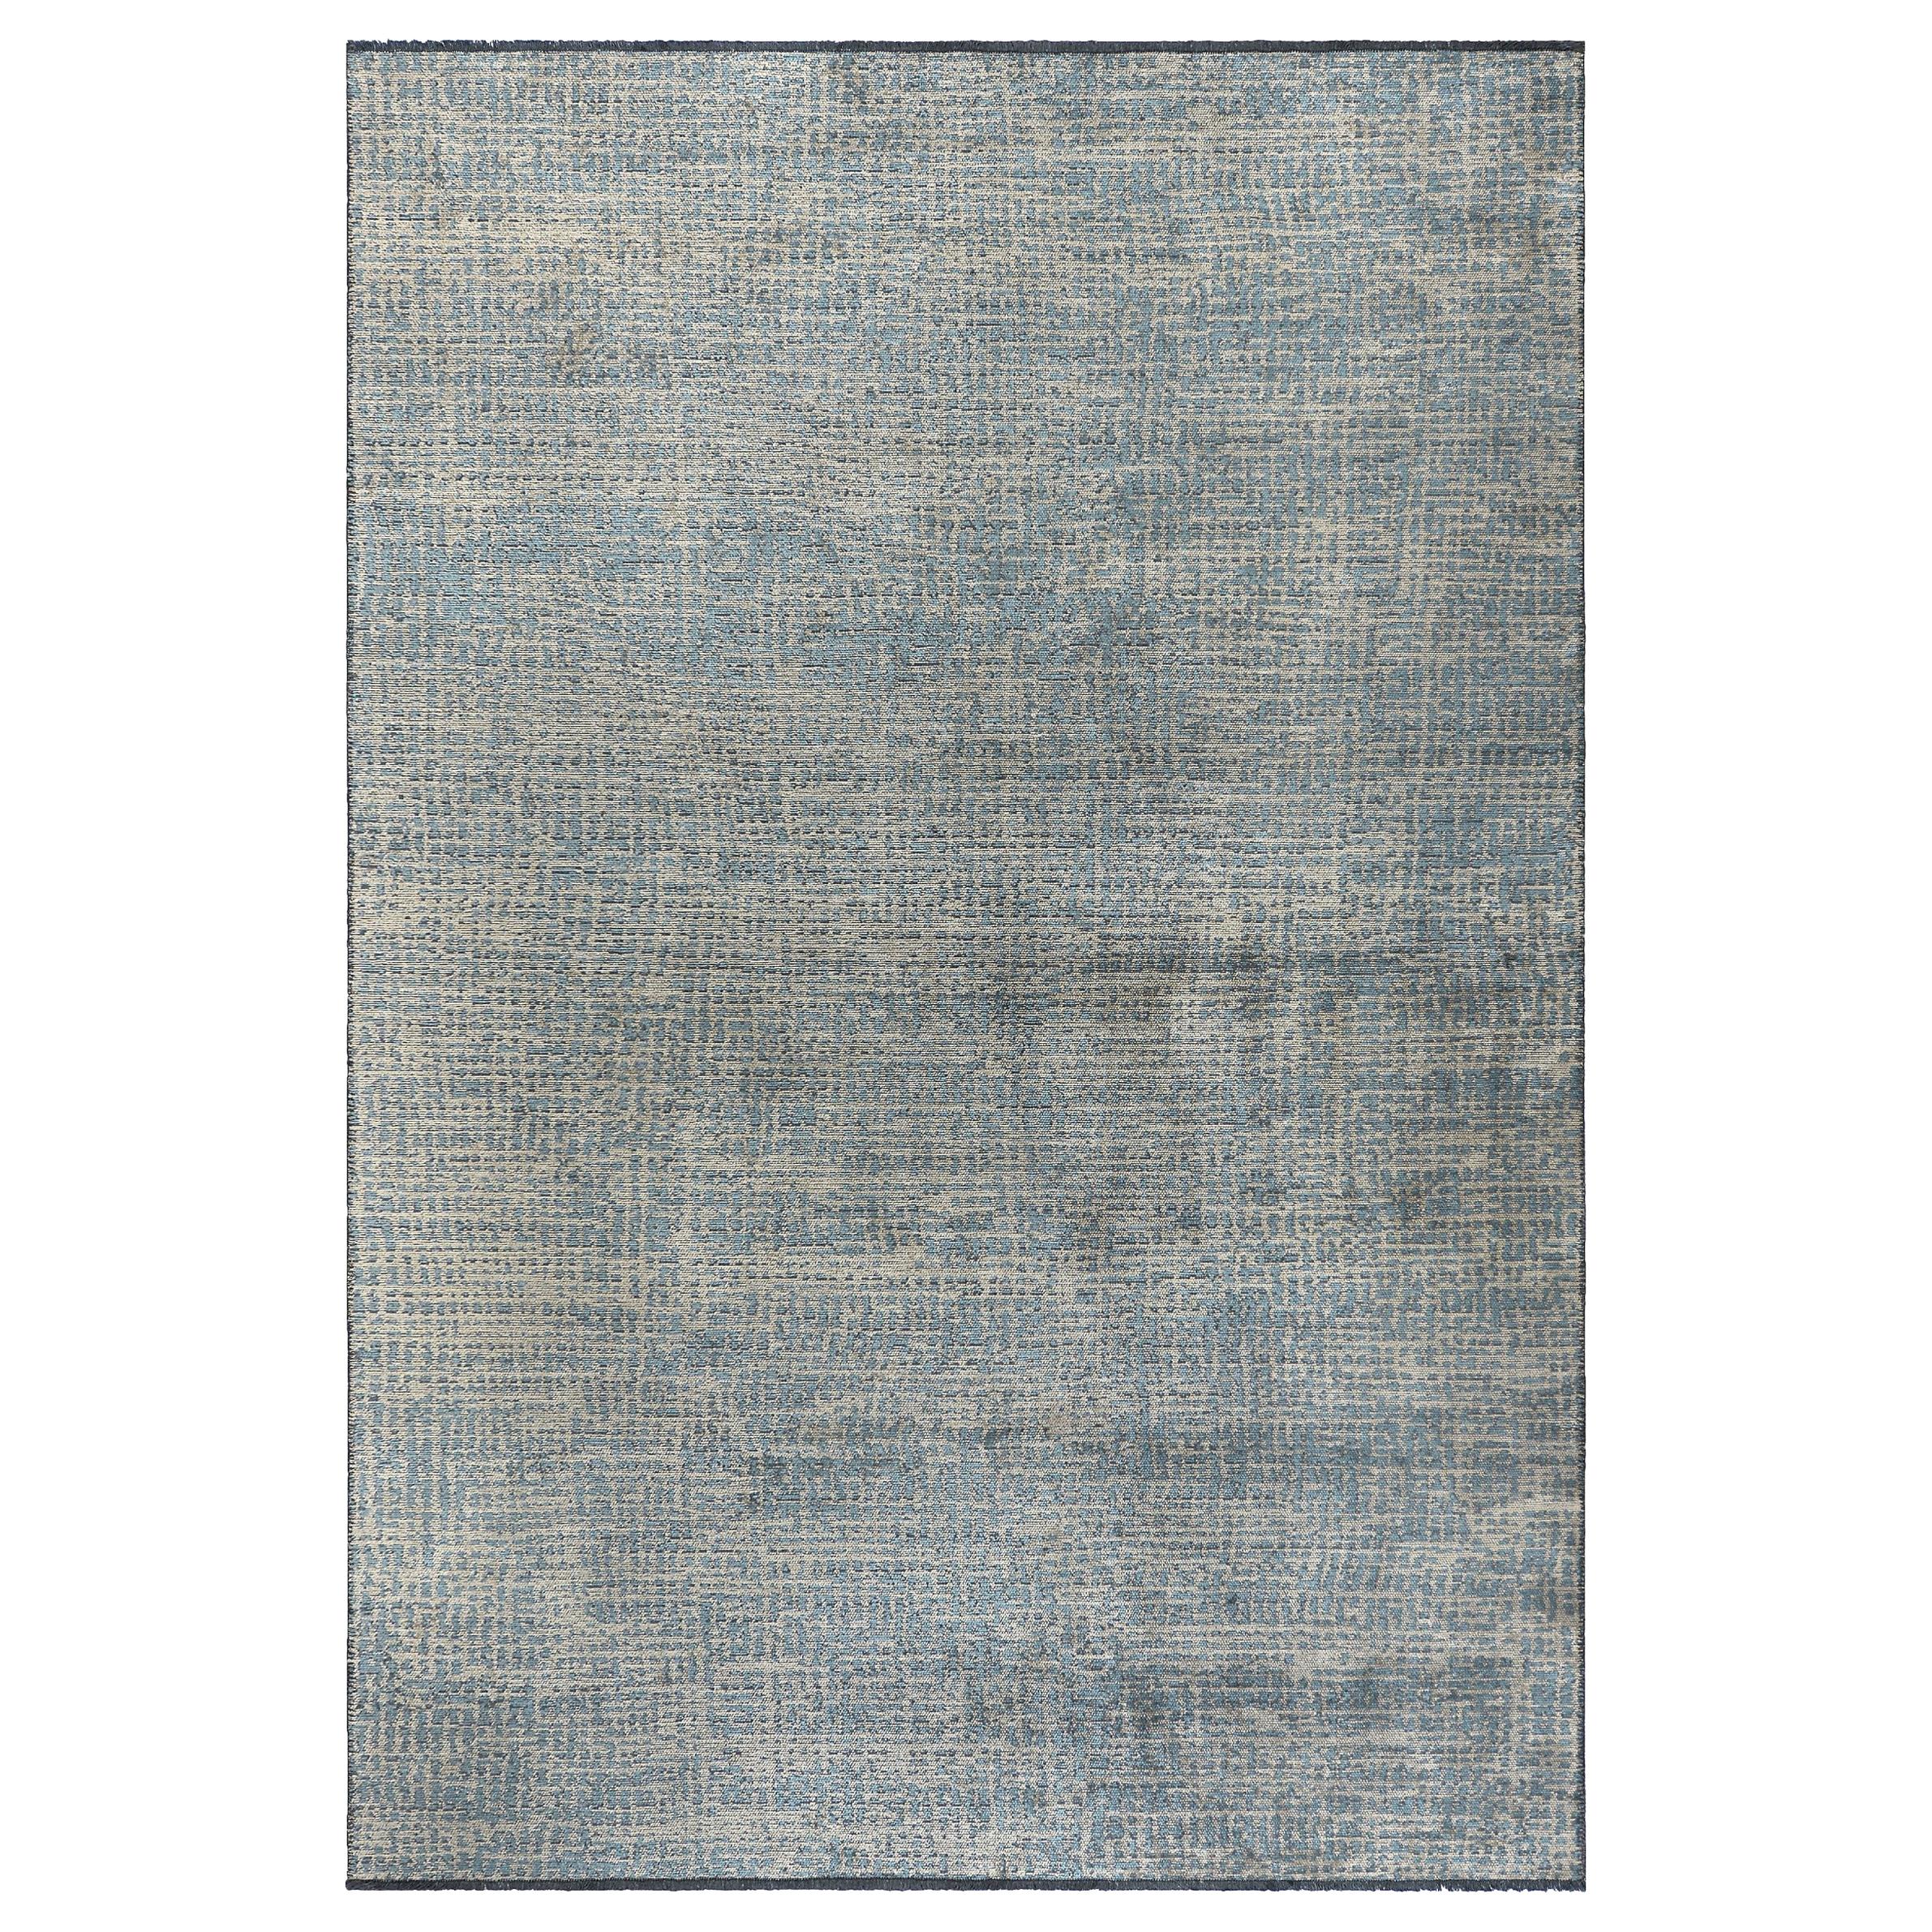 Light Blue and Silver Gray Tight Grid Abstract-Geo Pattern Rug with Shine For Sale